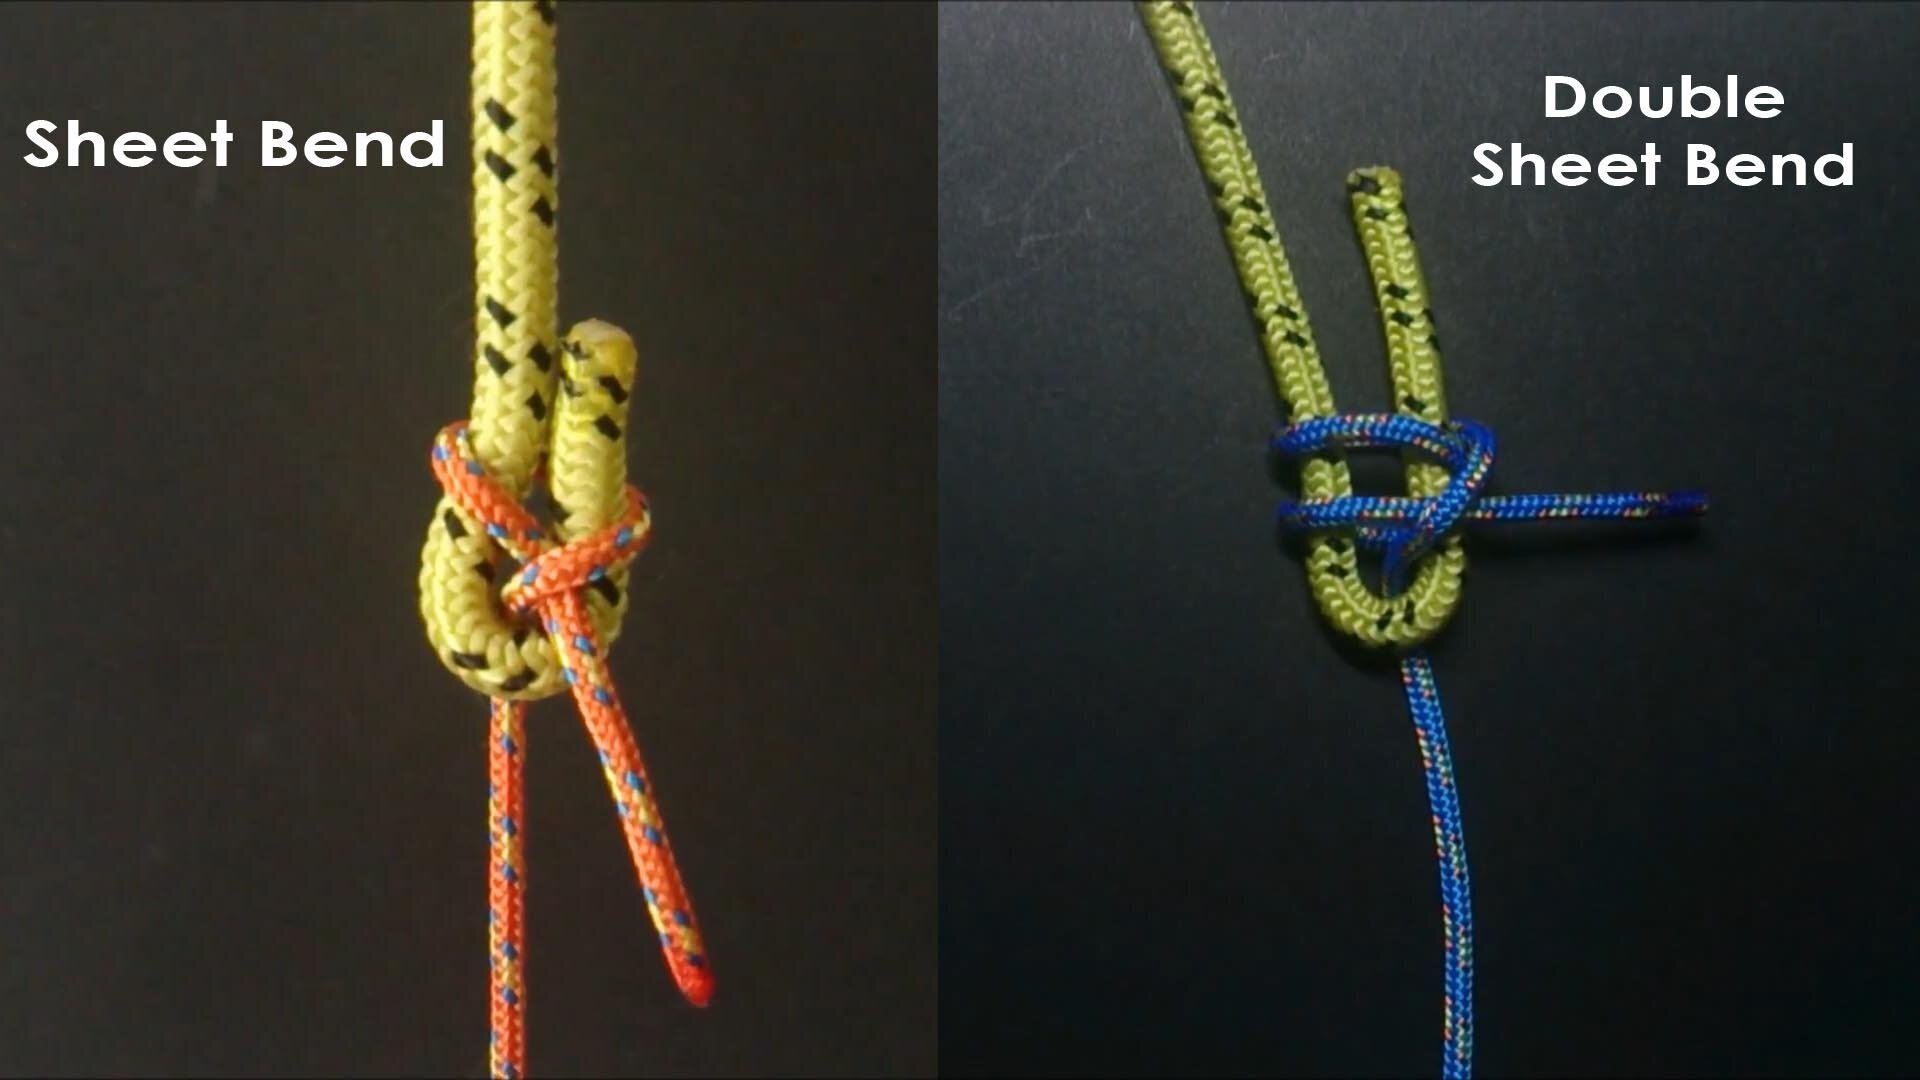 Sheet Bend and Double Sheet Bend using ropes of different sizes.